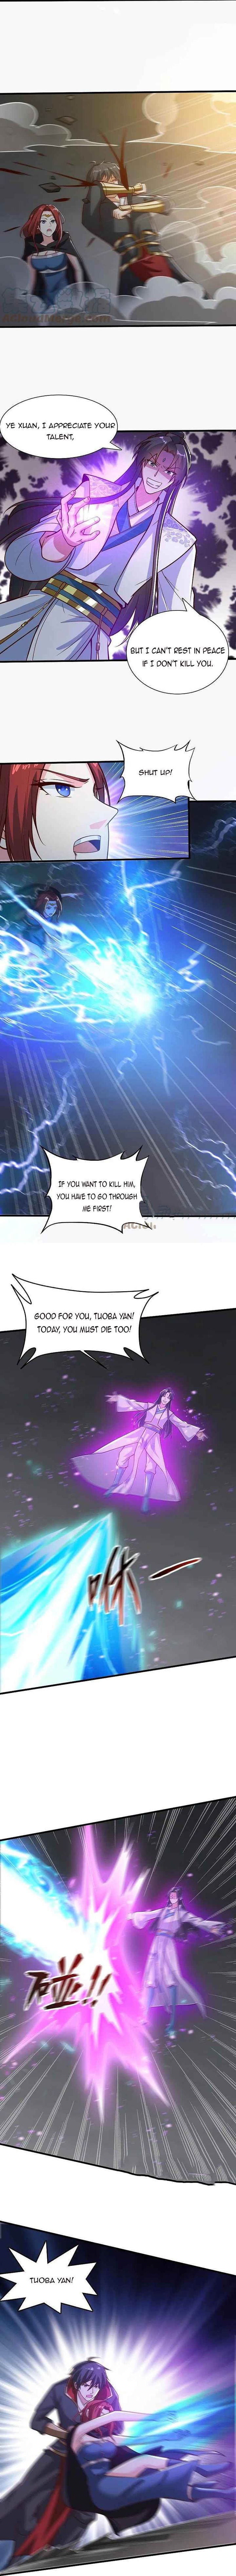 One Sword Reigns Supreme Chapter 200 Page 3